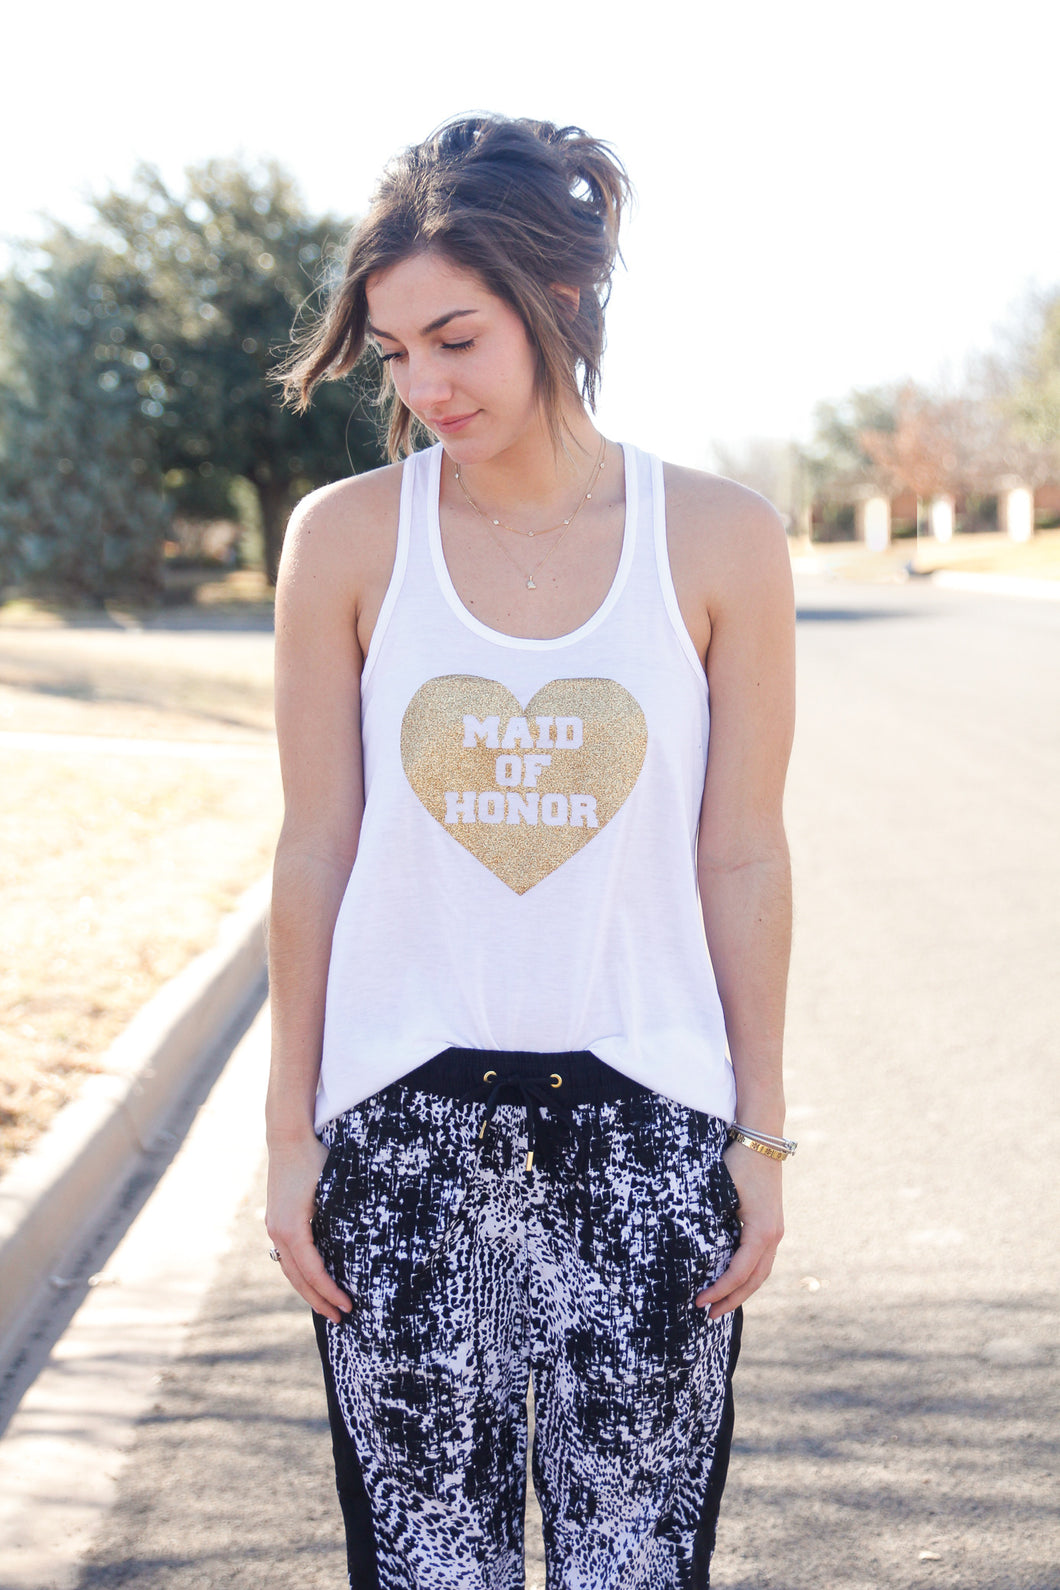 Heart Maid of honor Tank top 